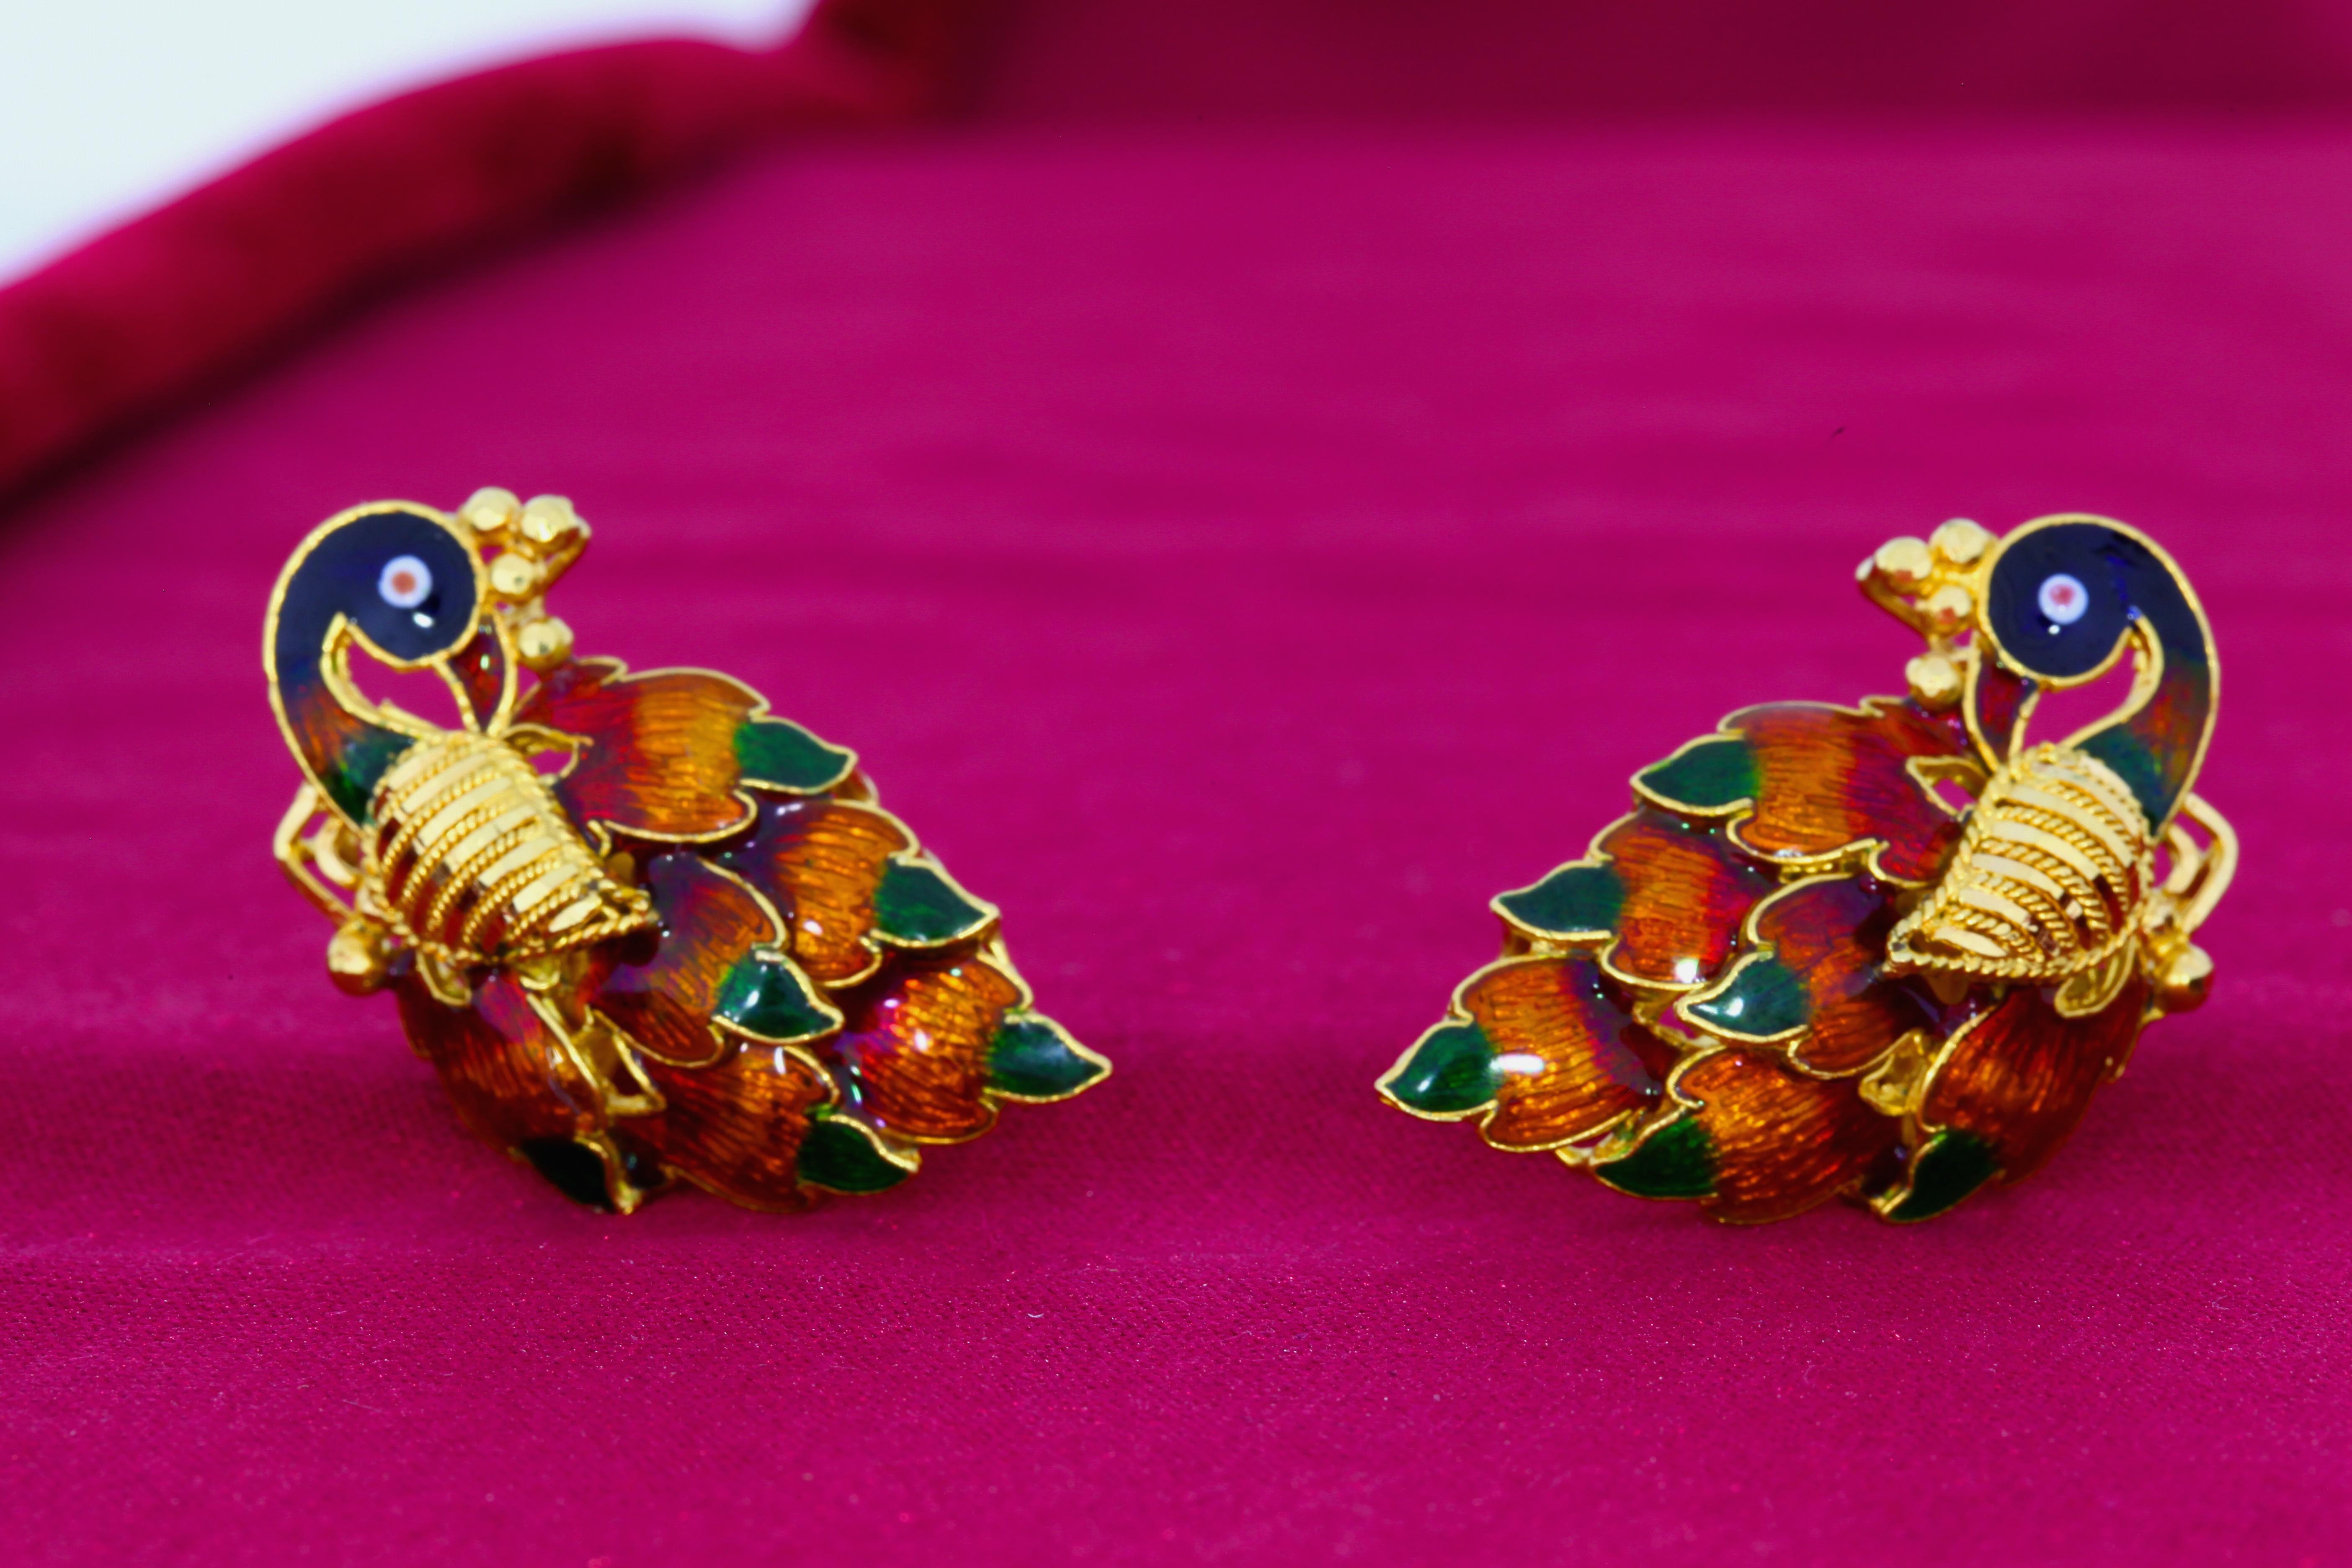 These earrings in 22 karat gold feature bright colors and detailed enamel work bringing the peacock imagery to life.